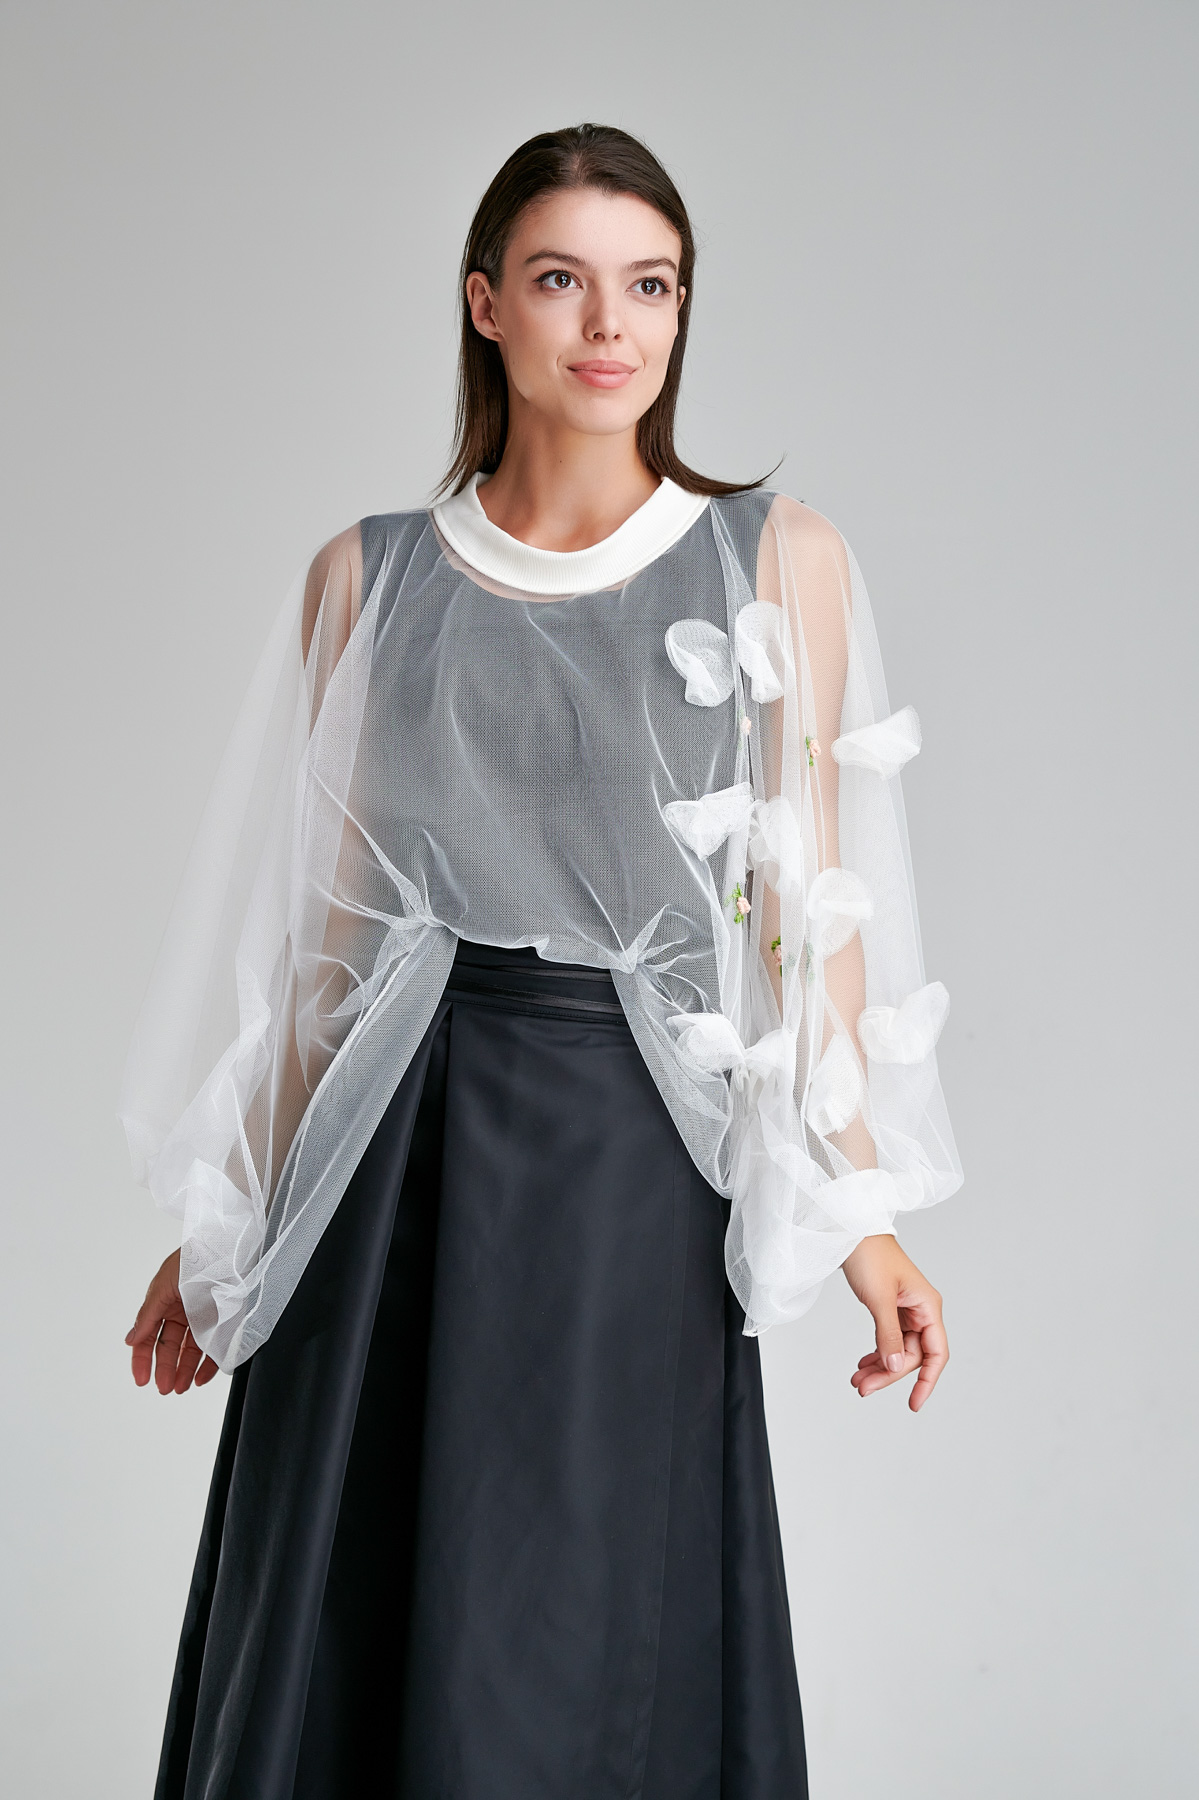 ELLIE elegant tulle blouse with white floral embroidery. Natural fabrics, original design, handmade embroidery